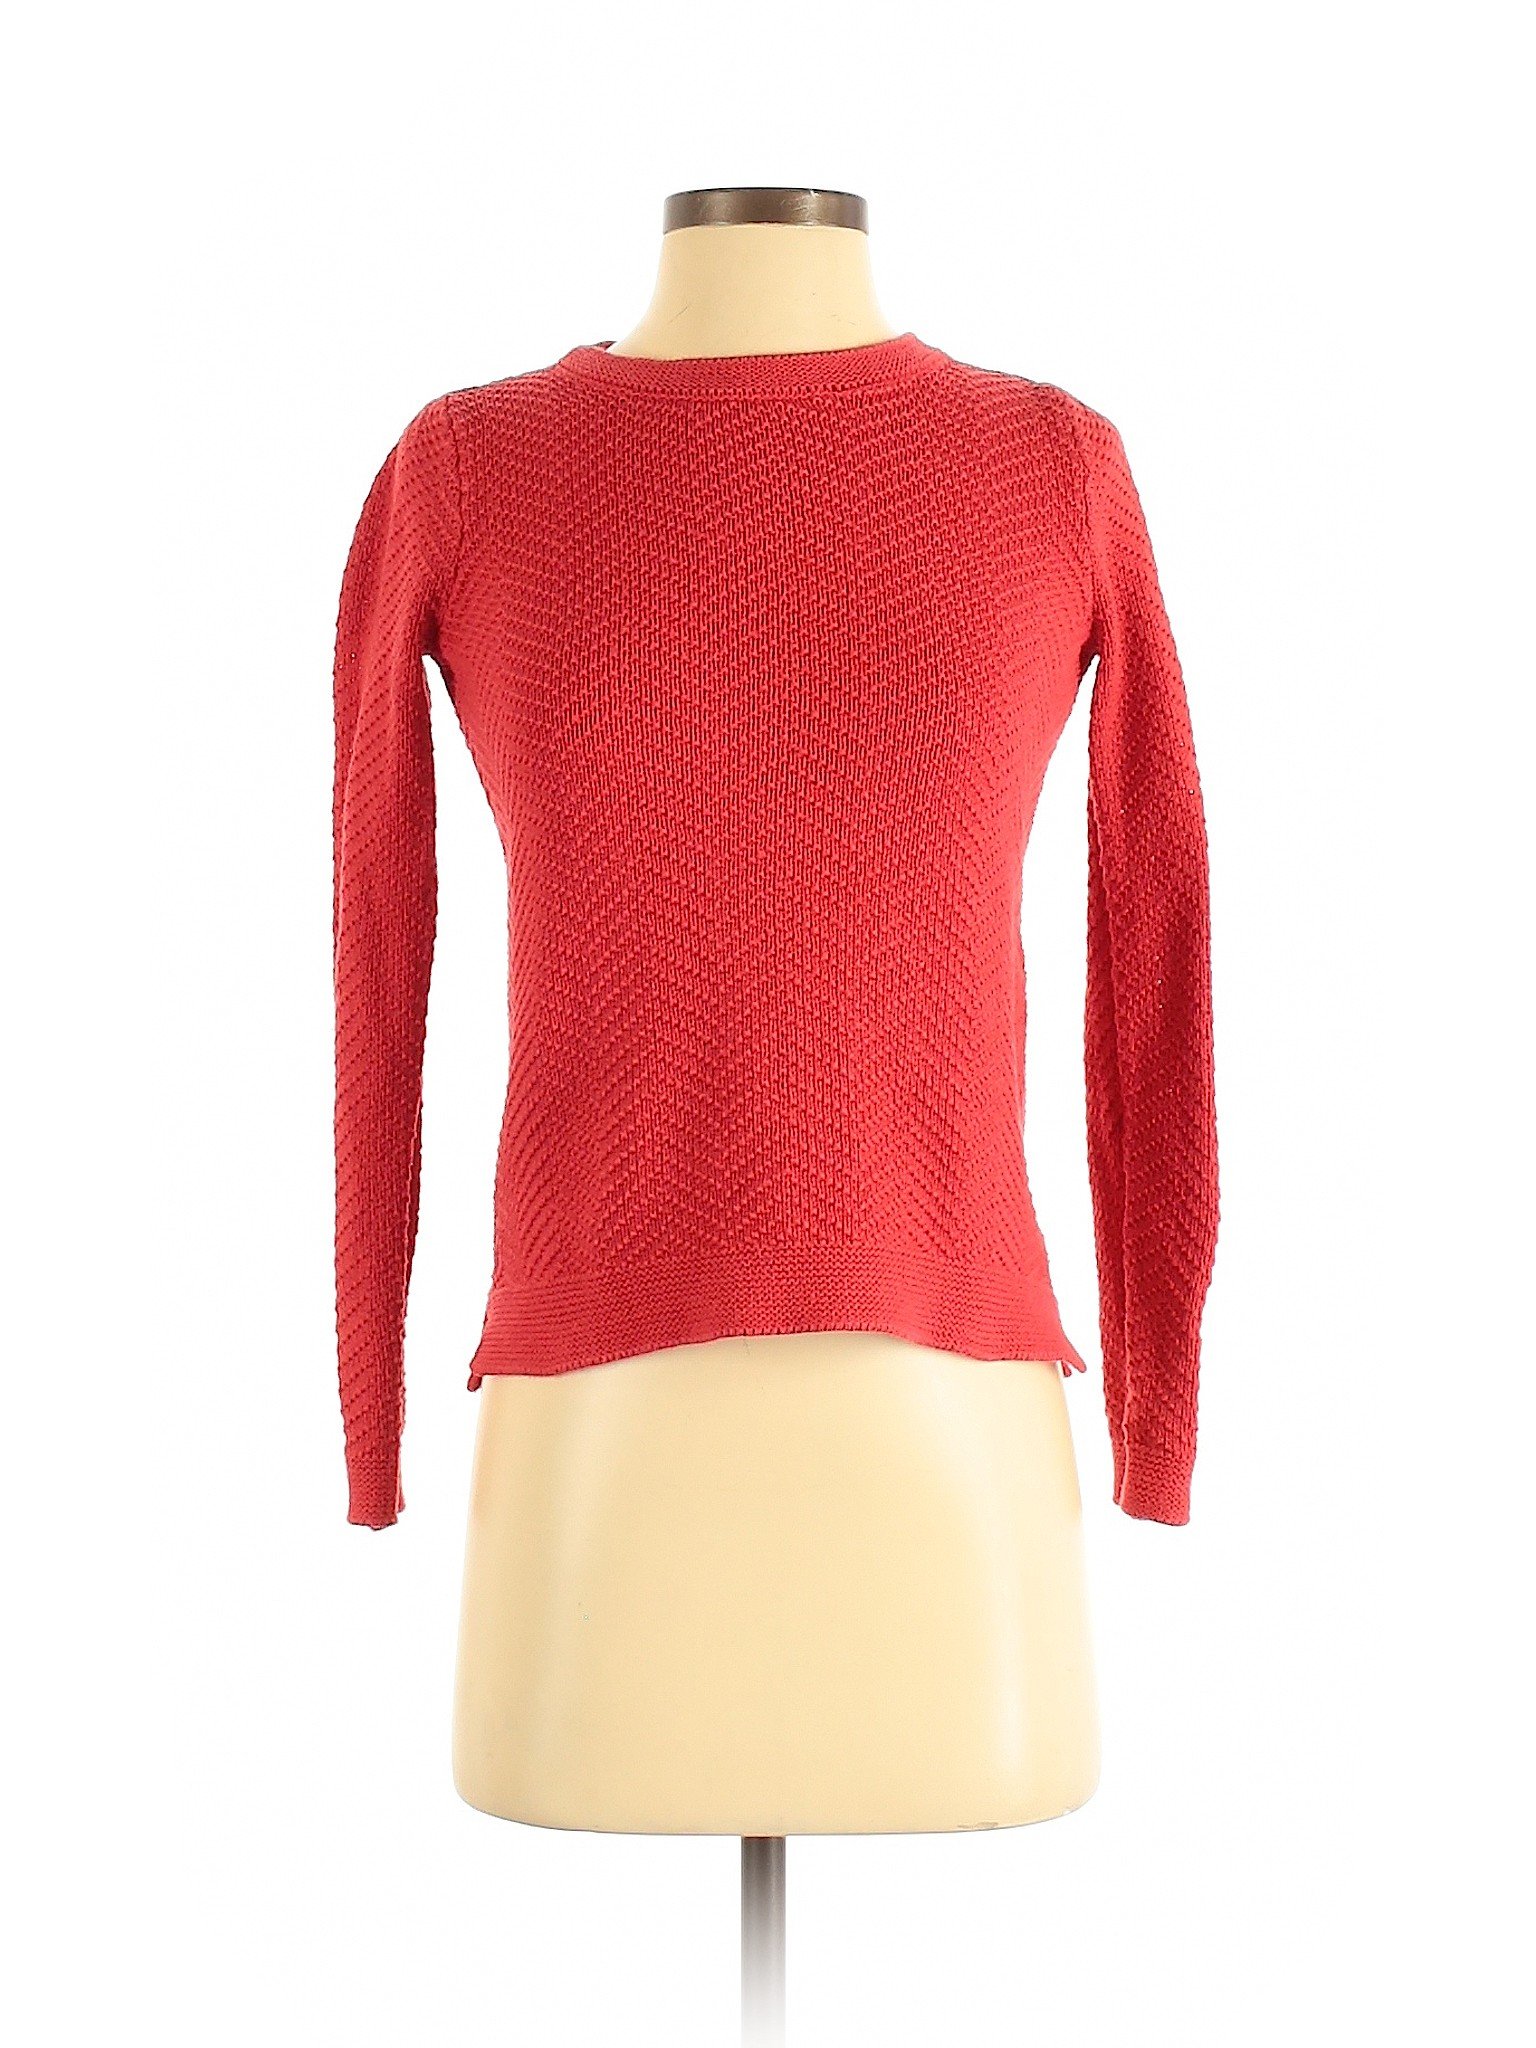 Old Navy Women Red Pullover Sweater XS | eBay